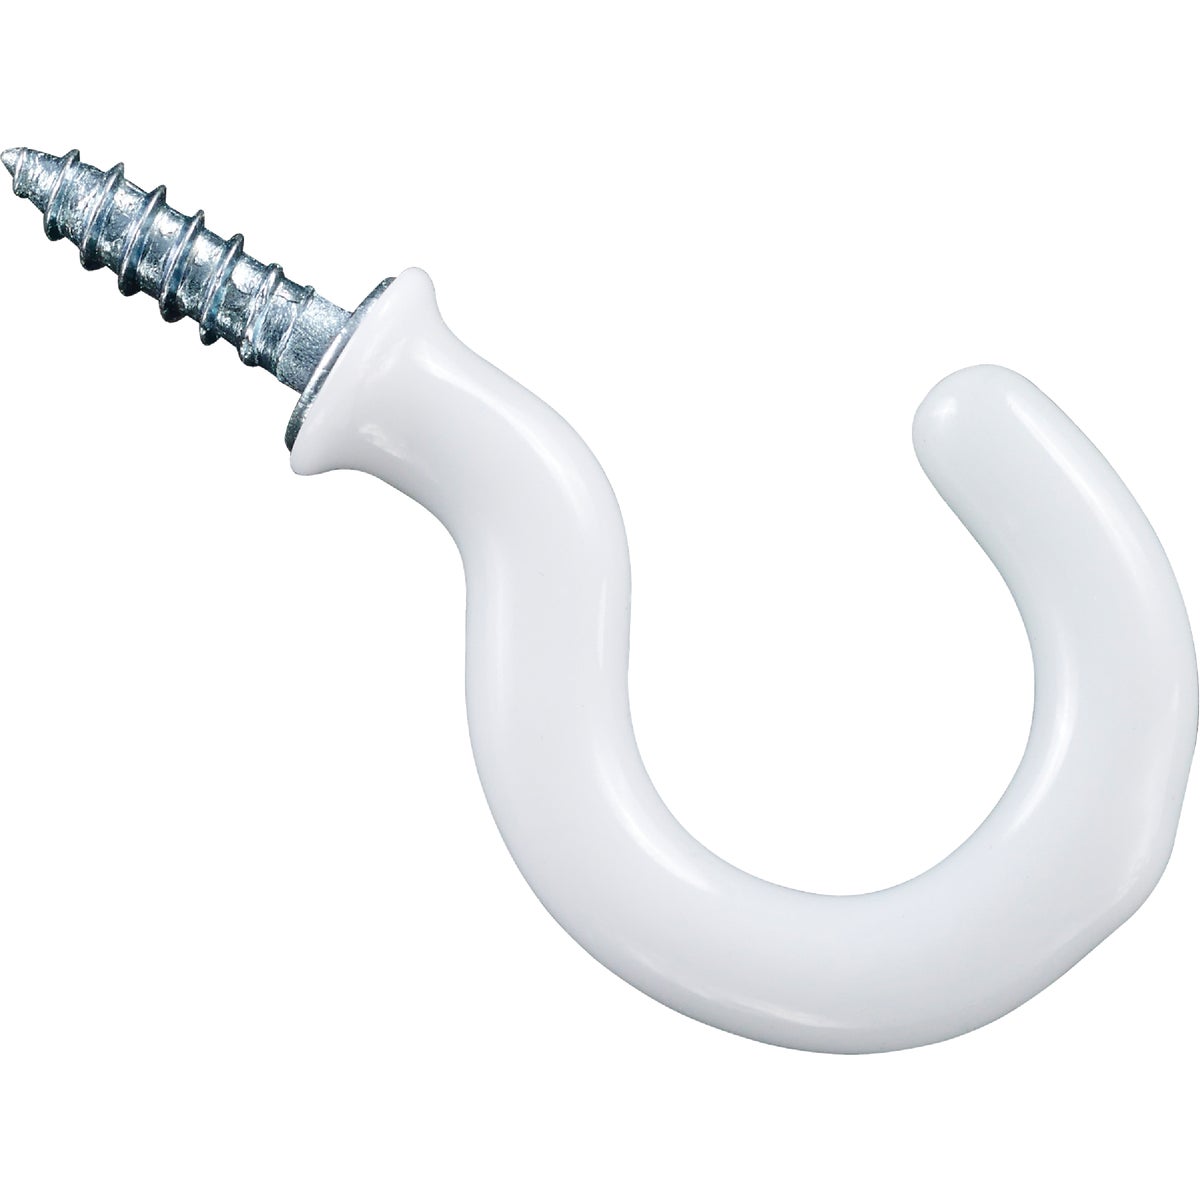 National 1 In. White Vinyl Cup Hook (30 Count)